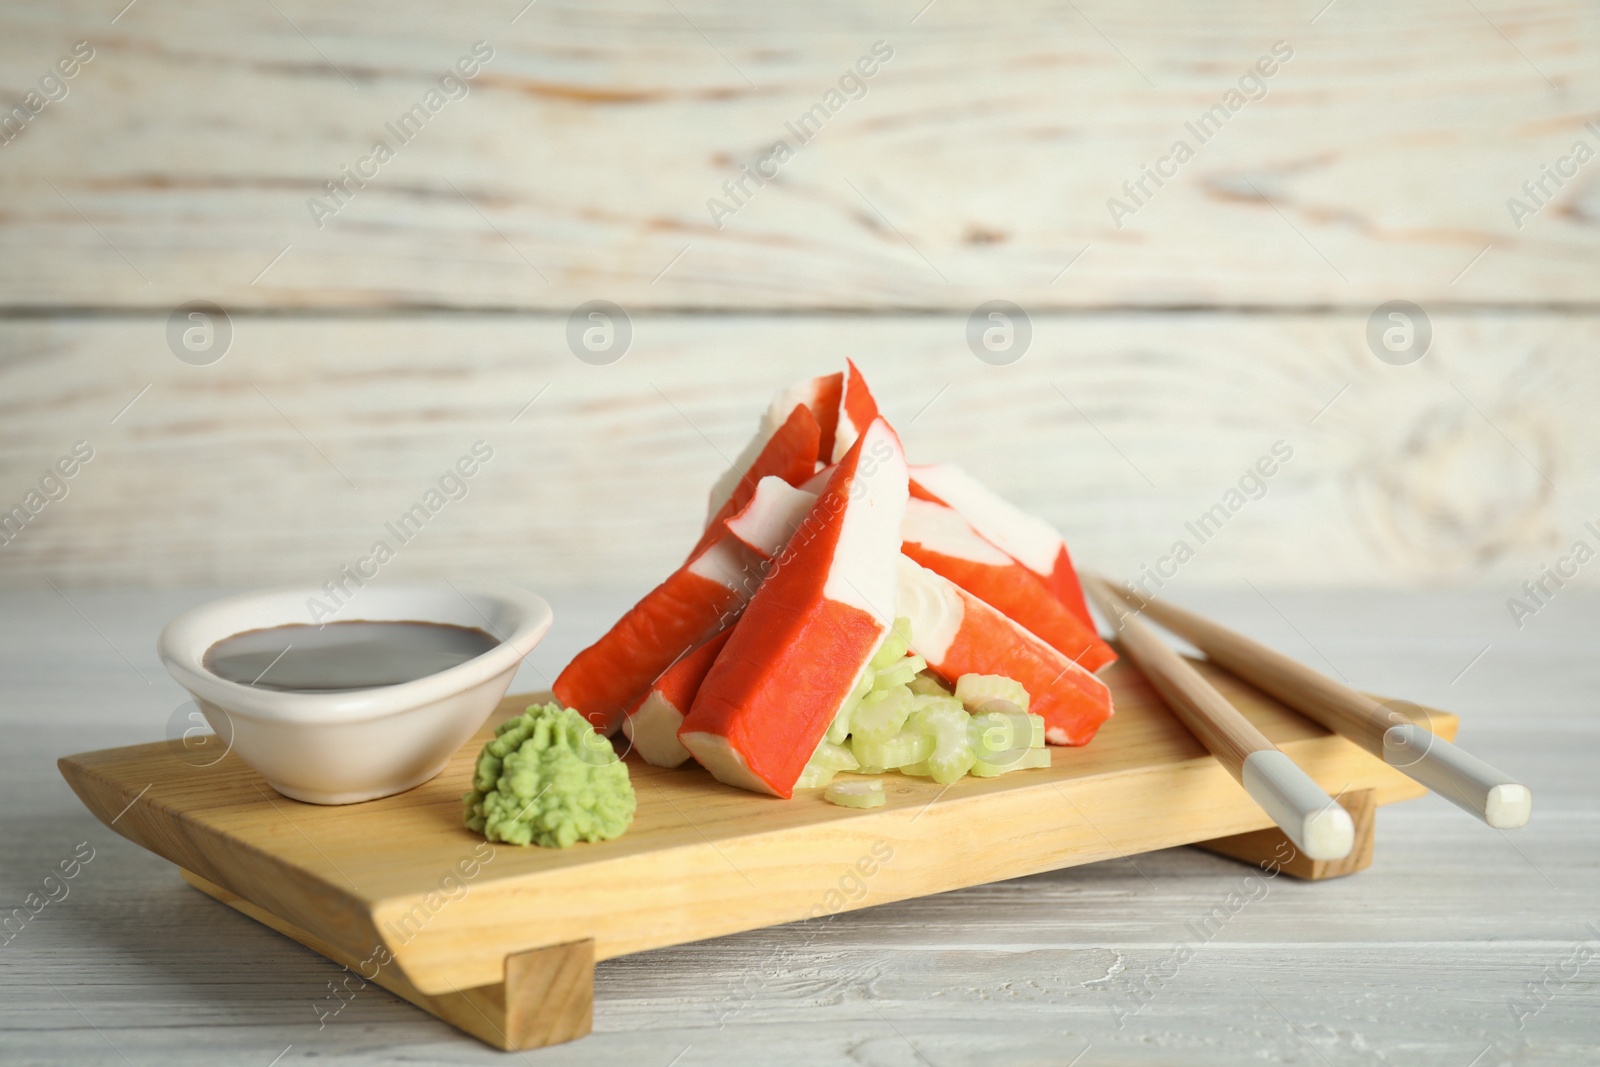 Photo of Cut crab sticks served on wooden table